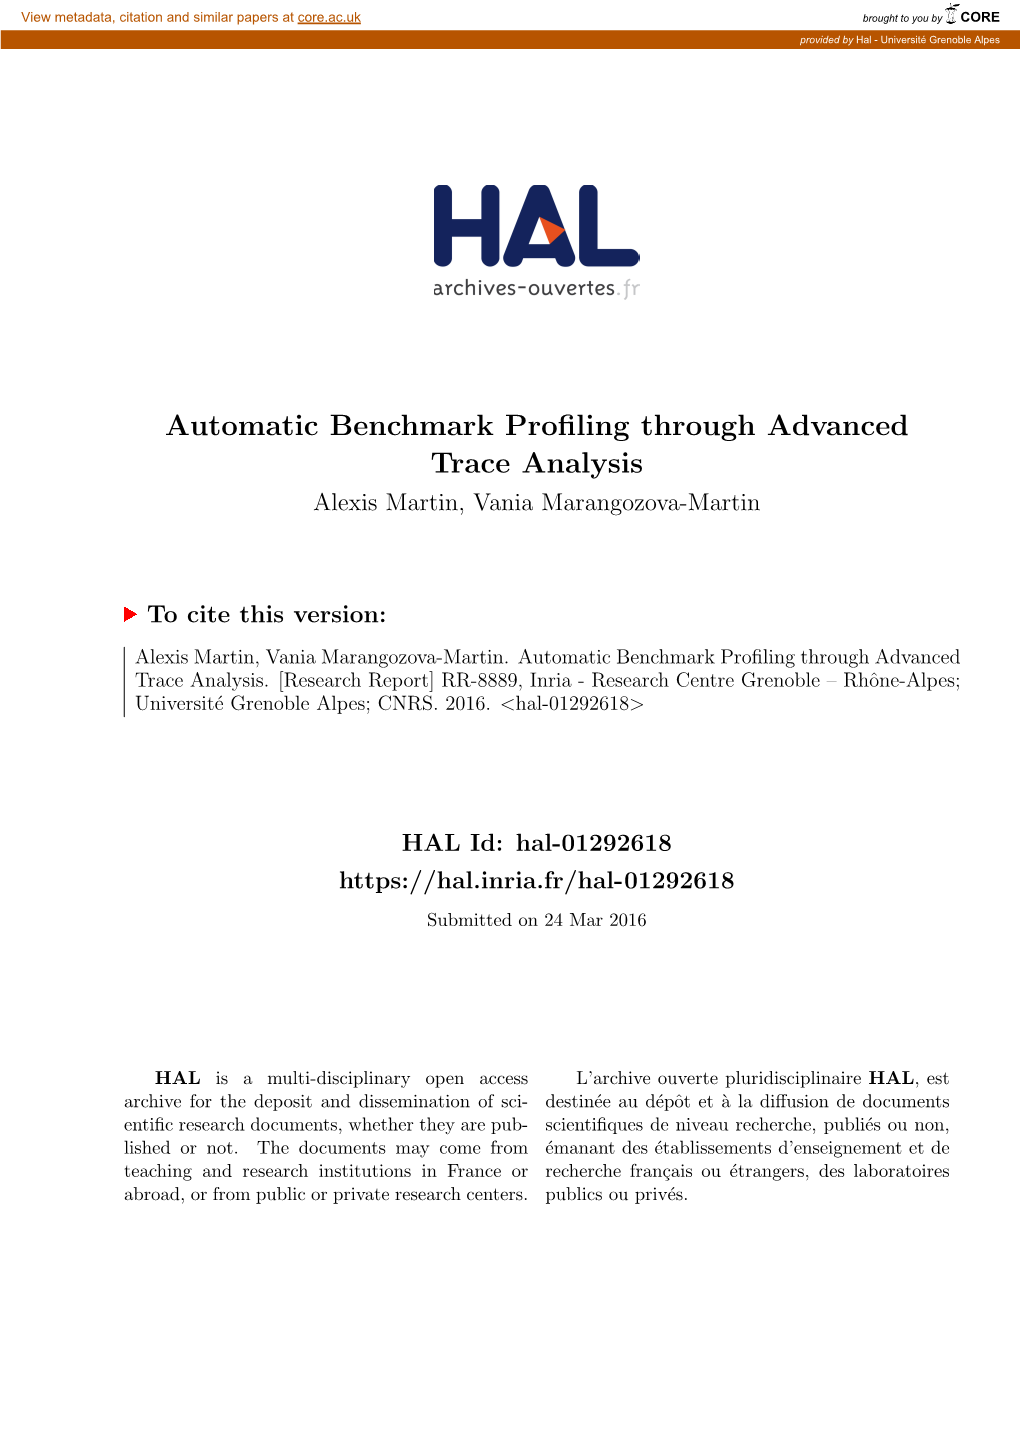 Automatic Benchmark Profiling Through Advanced Trace Analysis